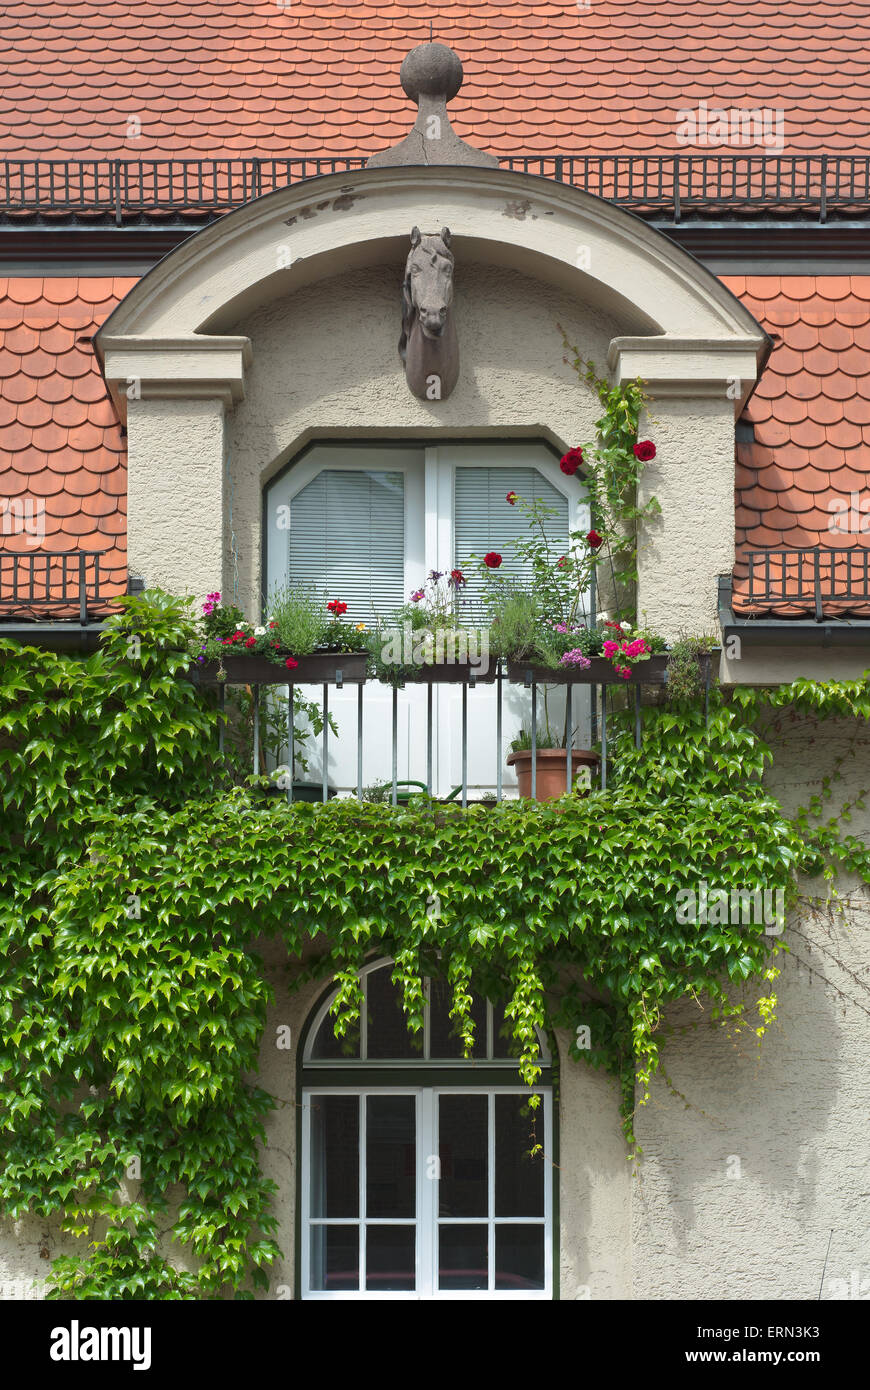 Climbing Vines of Ivy on a House with Horse Head and Flowers Stock Photo